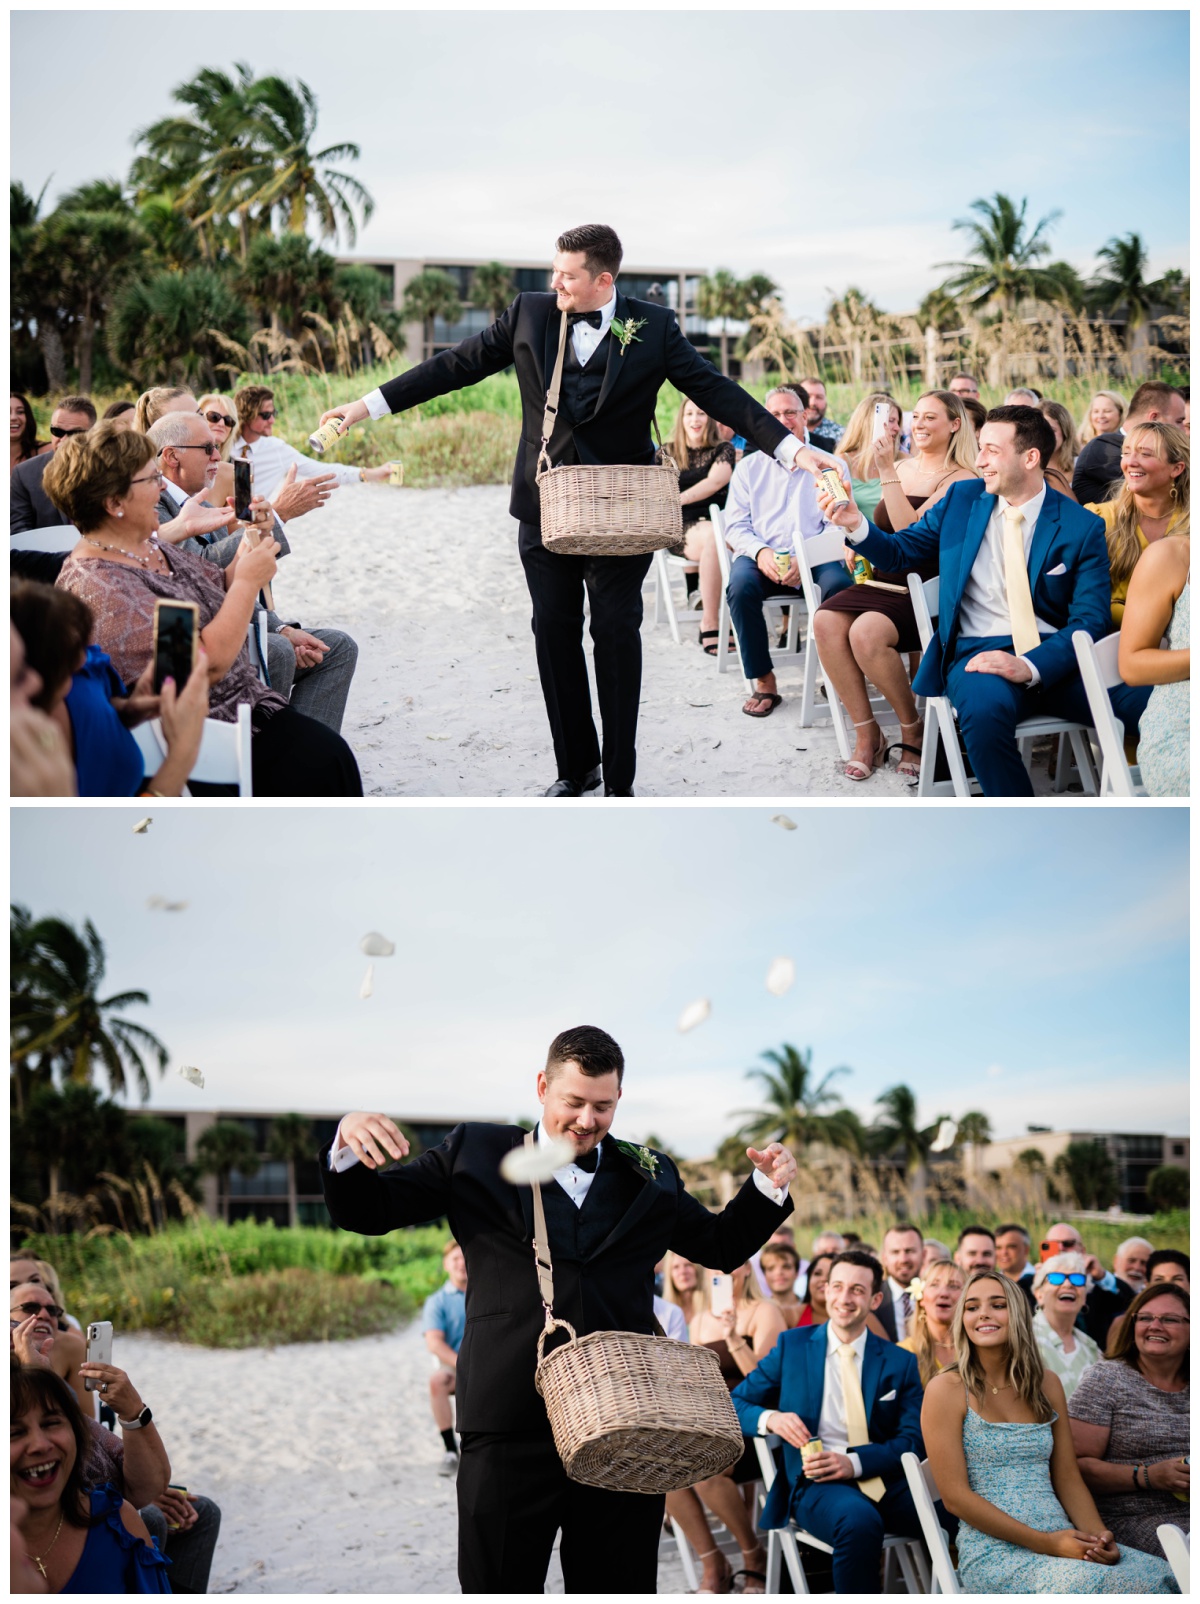 Flower man hands out rose petals and beer as he walks down the aisle in Florida beach wedding